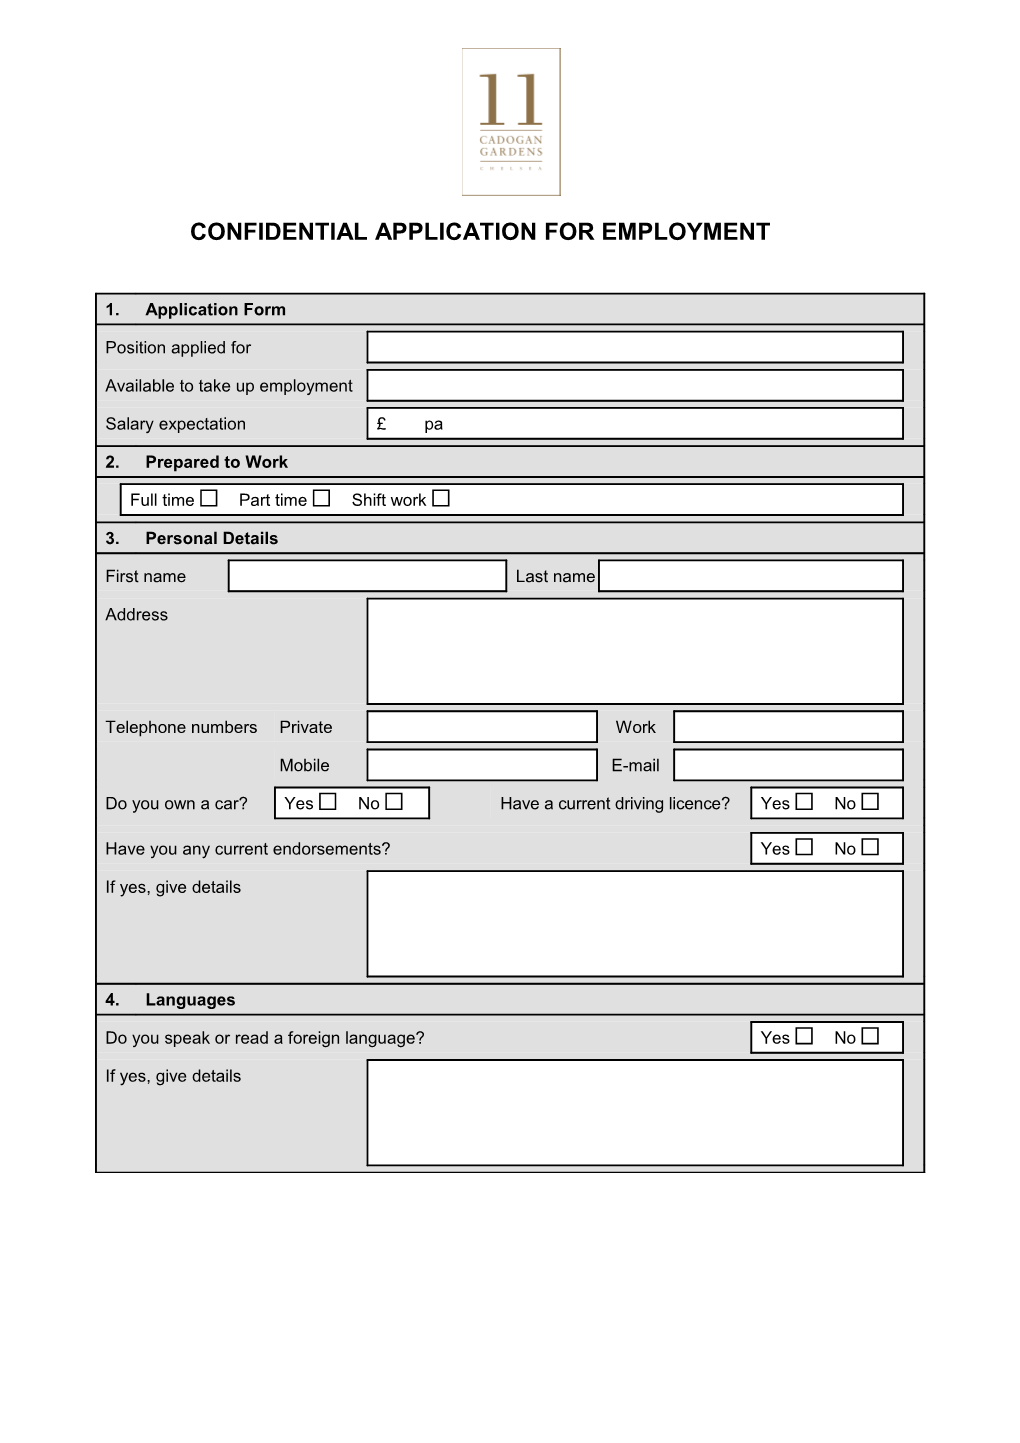 Application Form 1 Confidential Application for Employment